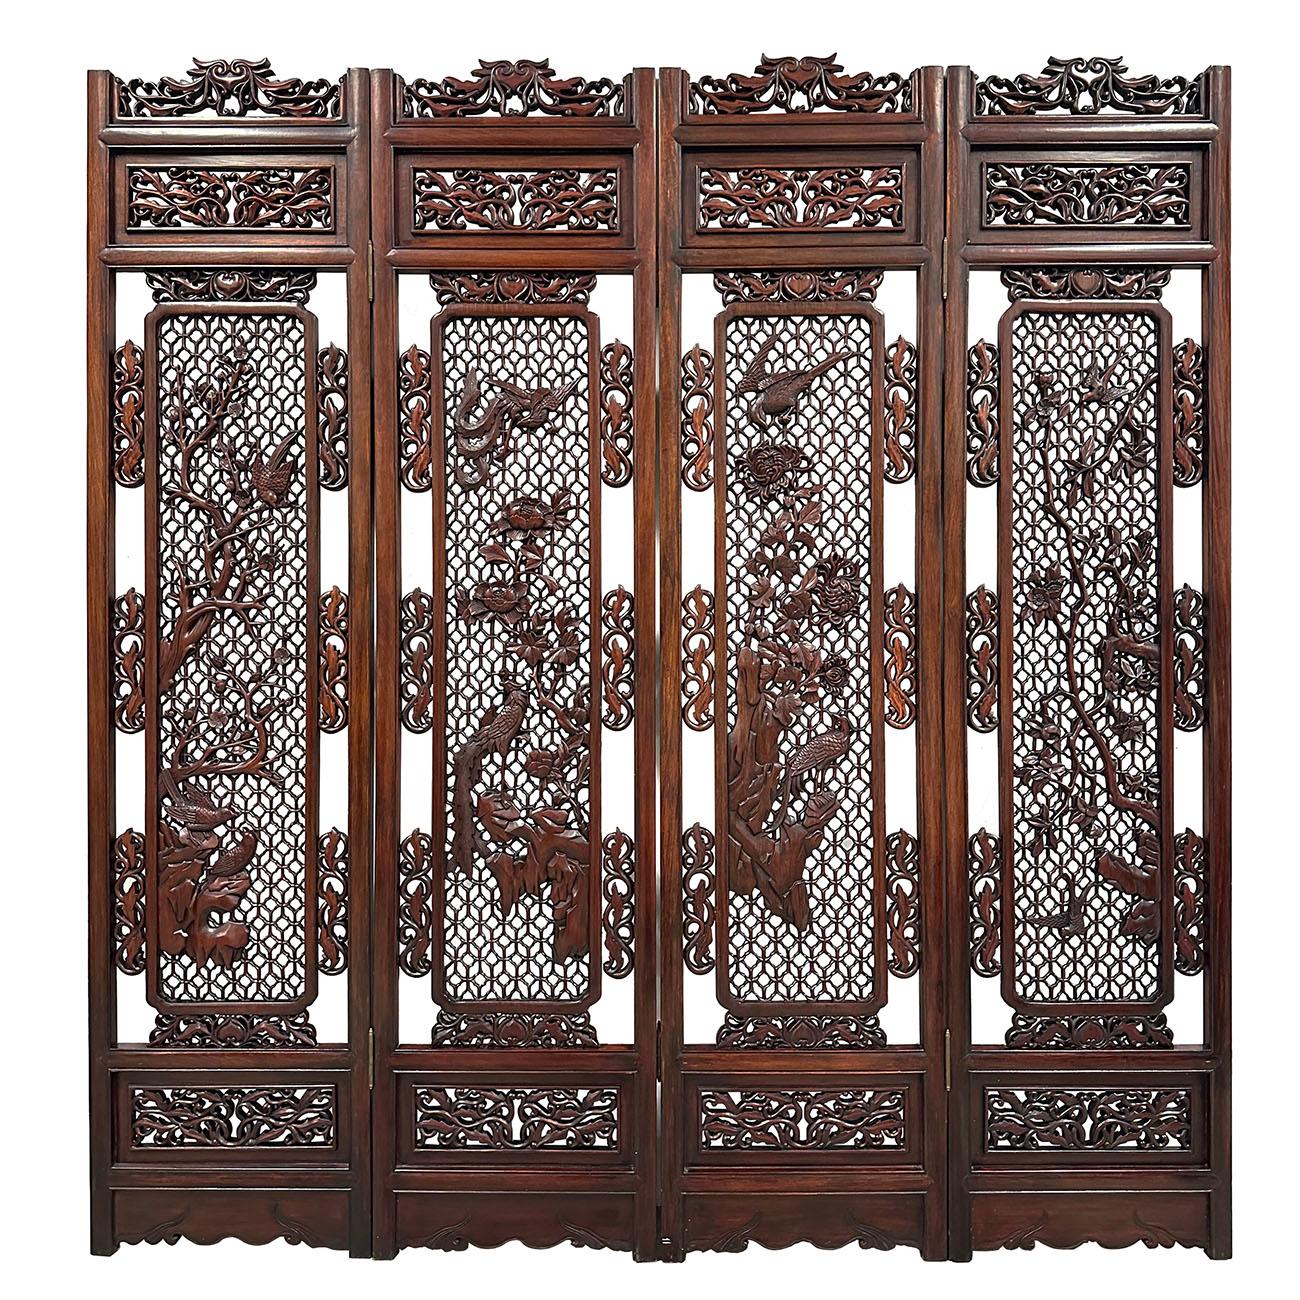 This is a set of 4 panels of Chinese antique open carved wooden screen which can be used as the room section panels in ancient China that are put together to make into a screen. Screens have been known to grace the rooms of wealthy Chinese homes